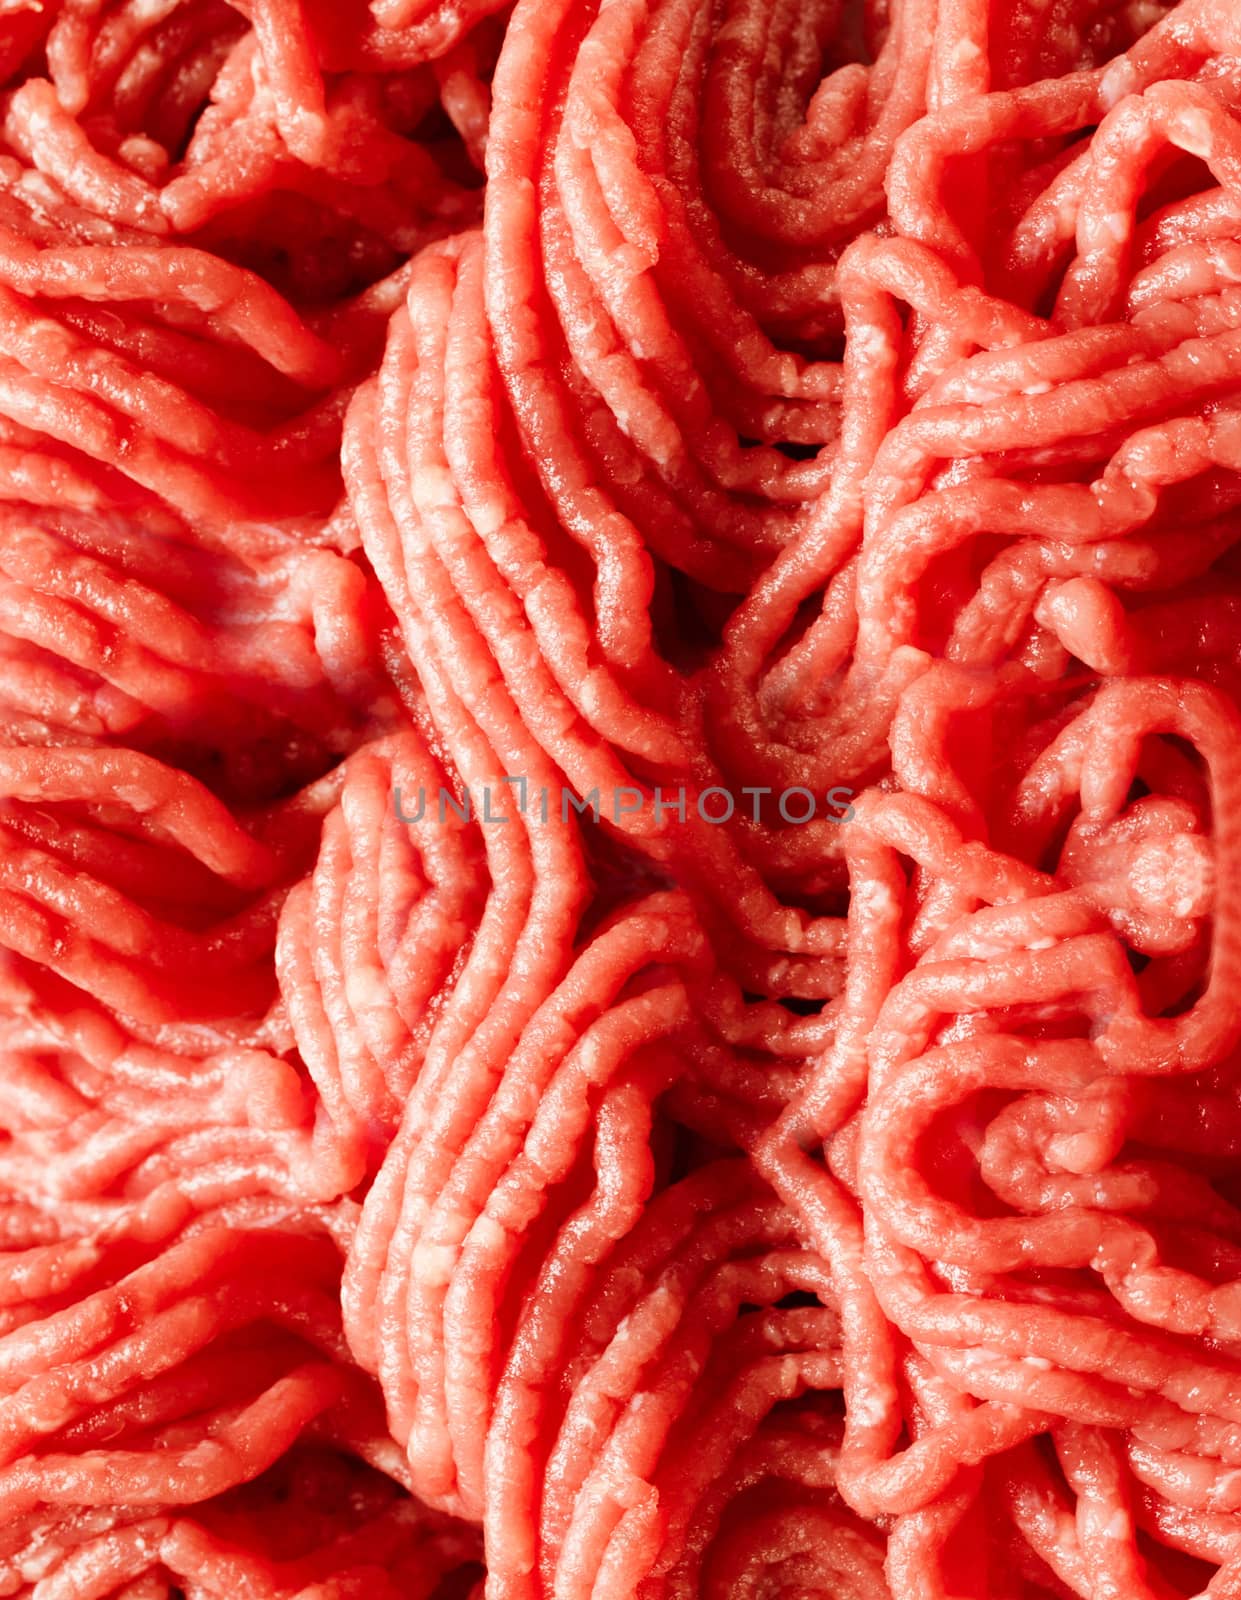 Raw minced beef close-up by shutswis